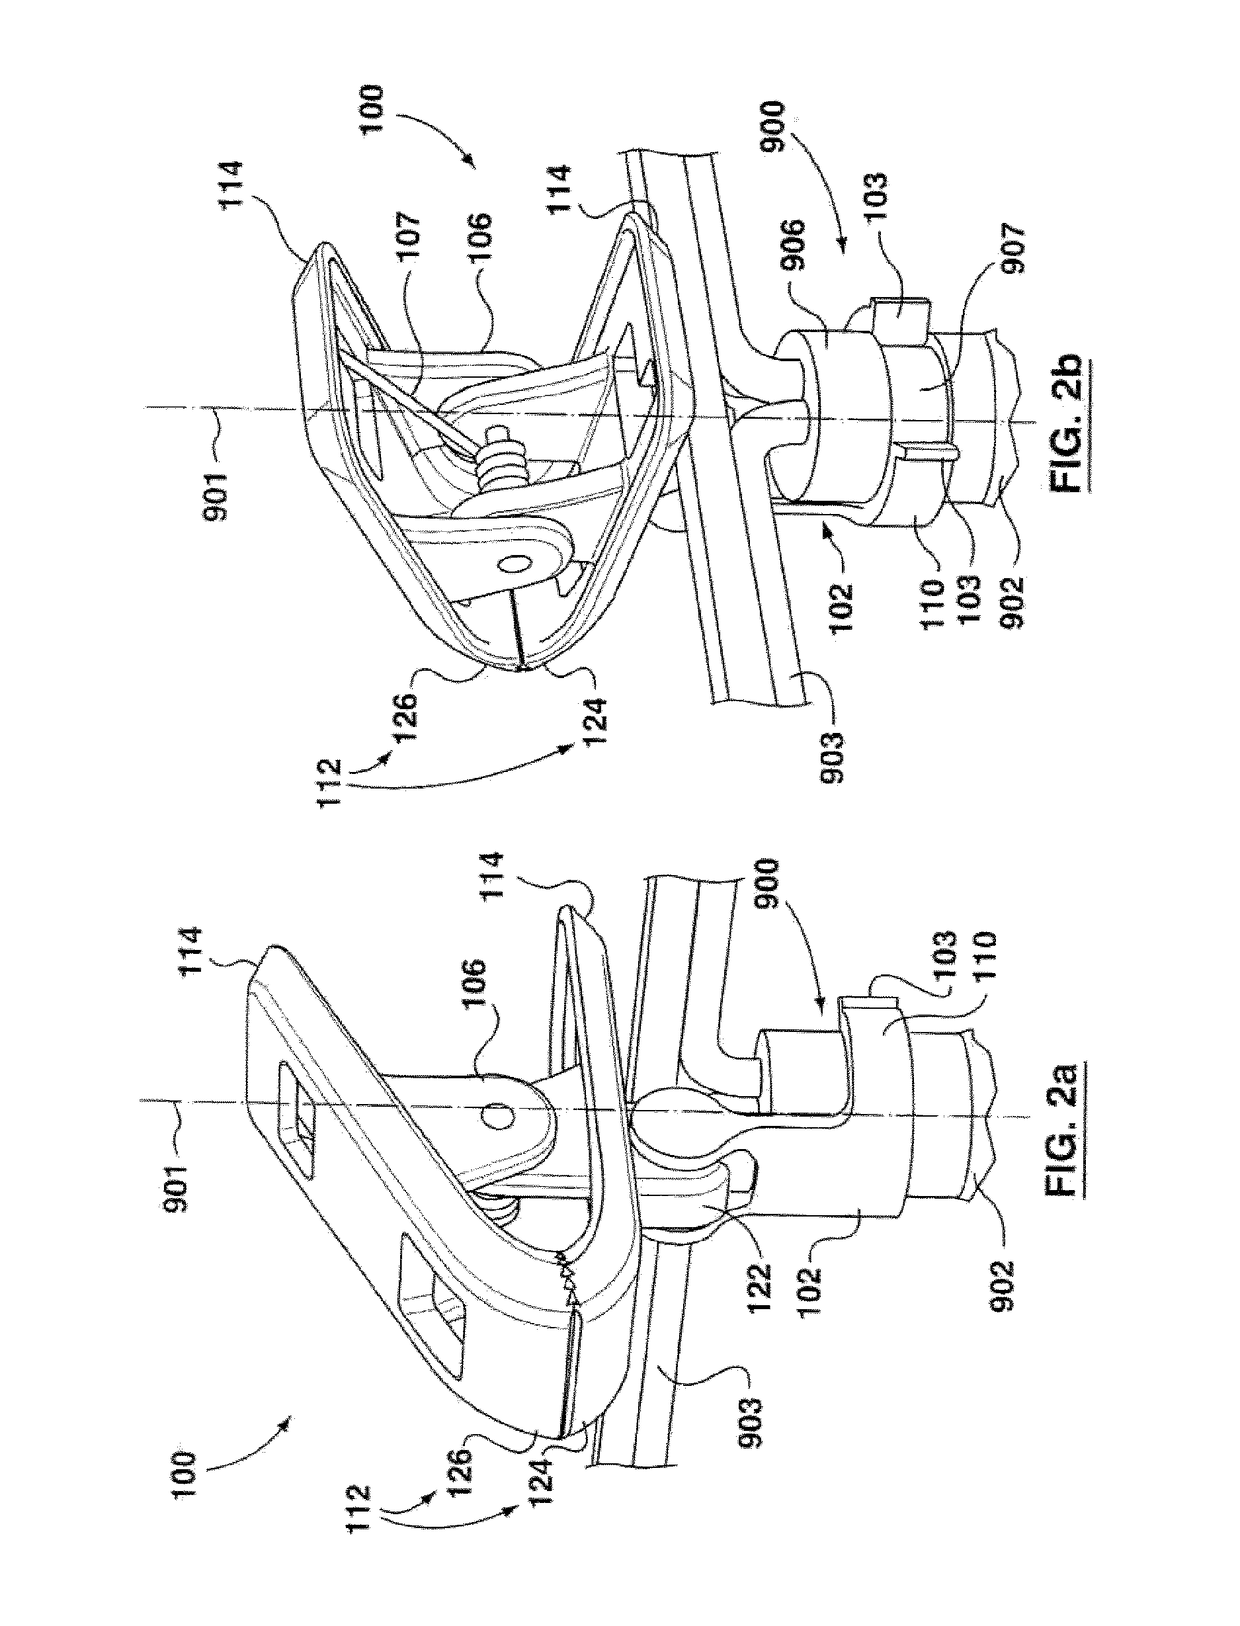 Mounting apparatus for light socket